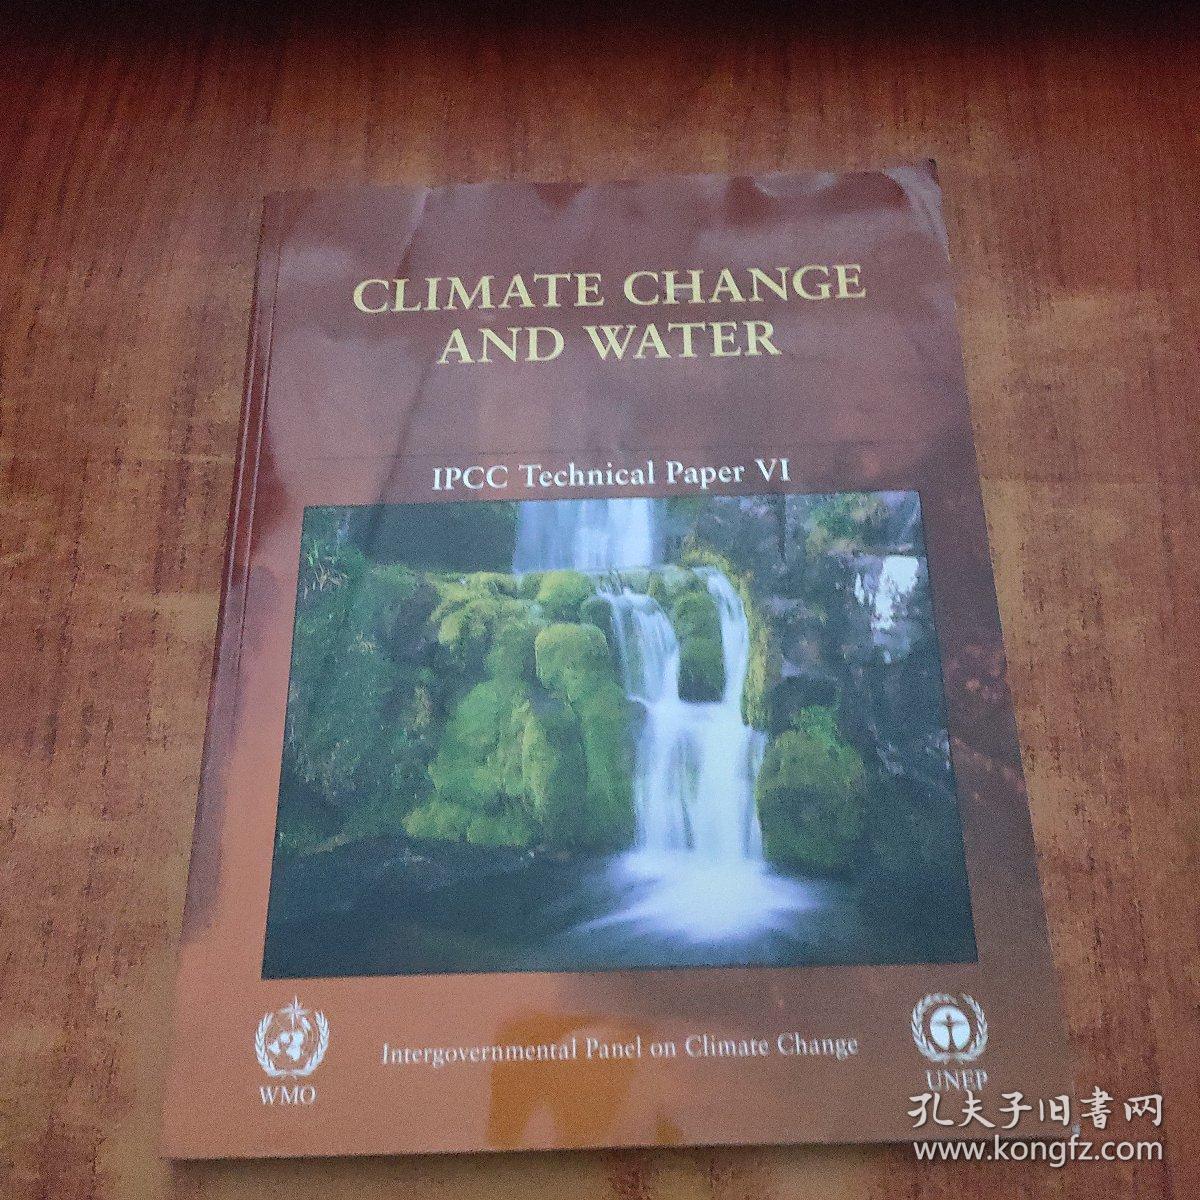 CLIMATE CHANGE AND WATER